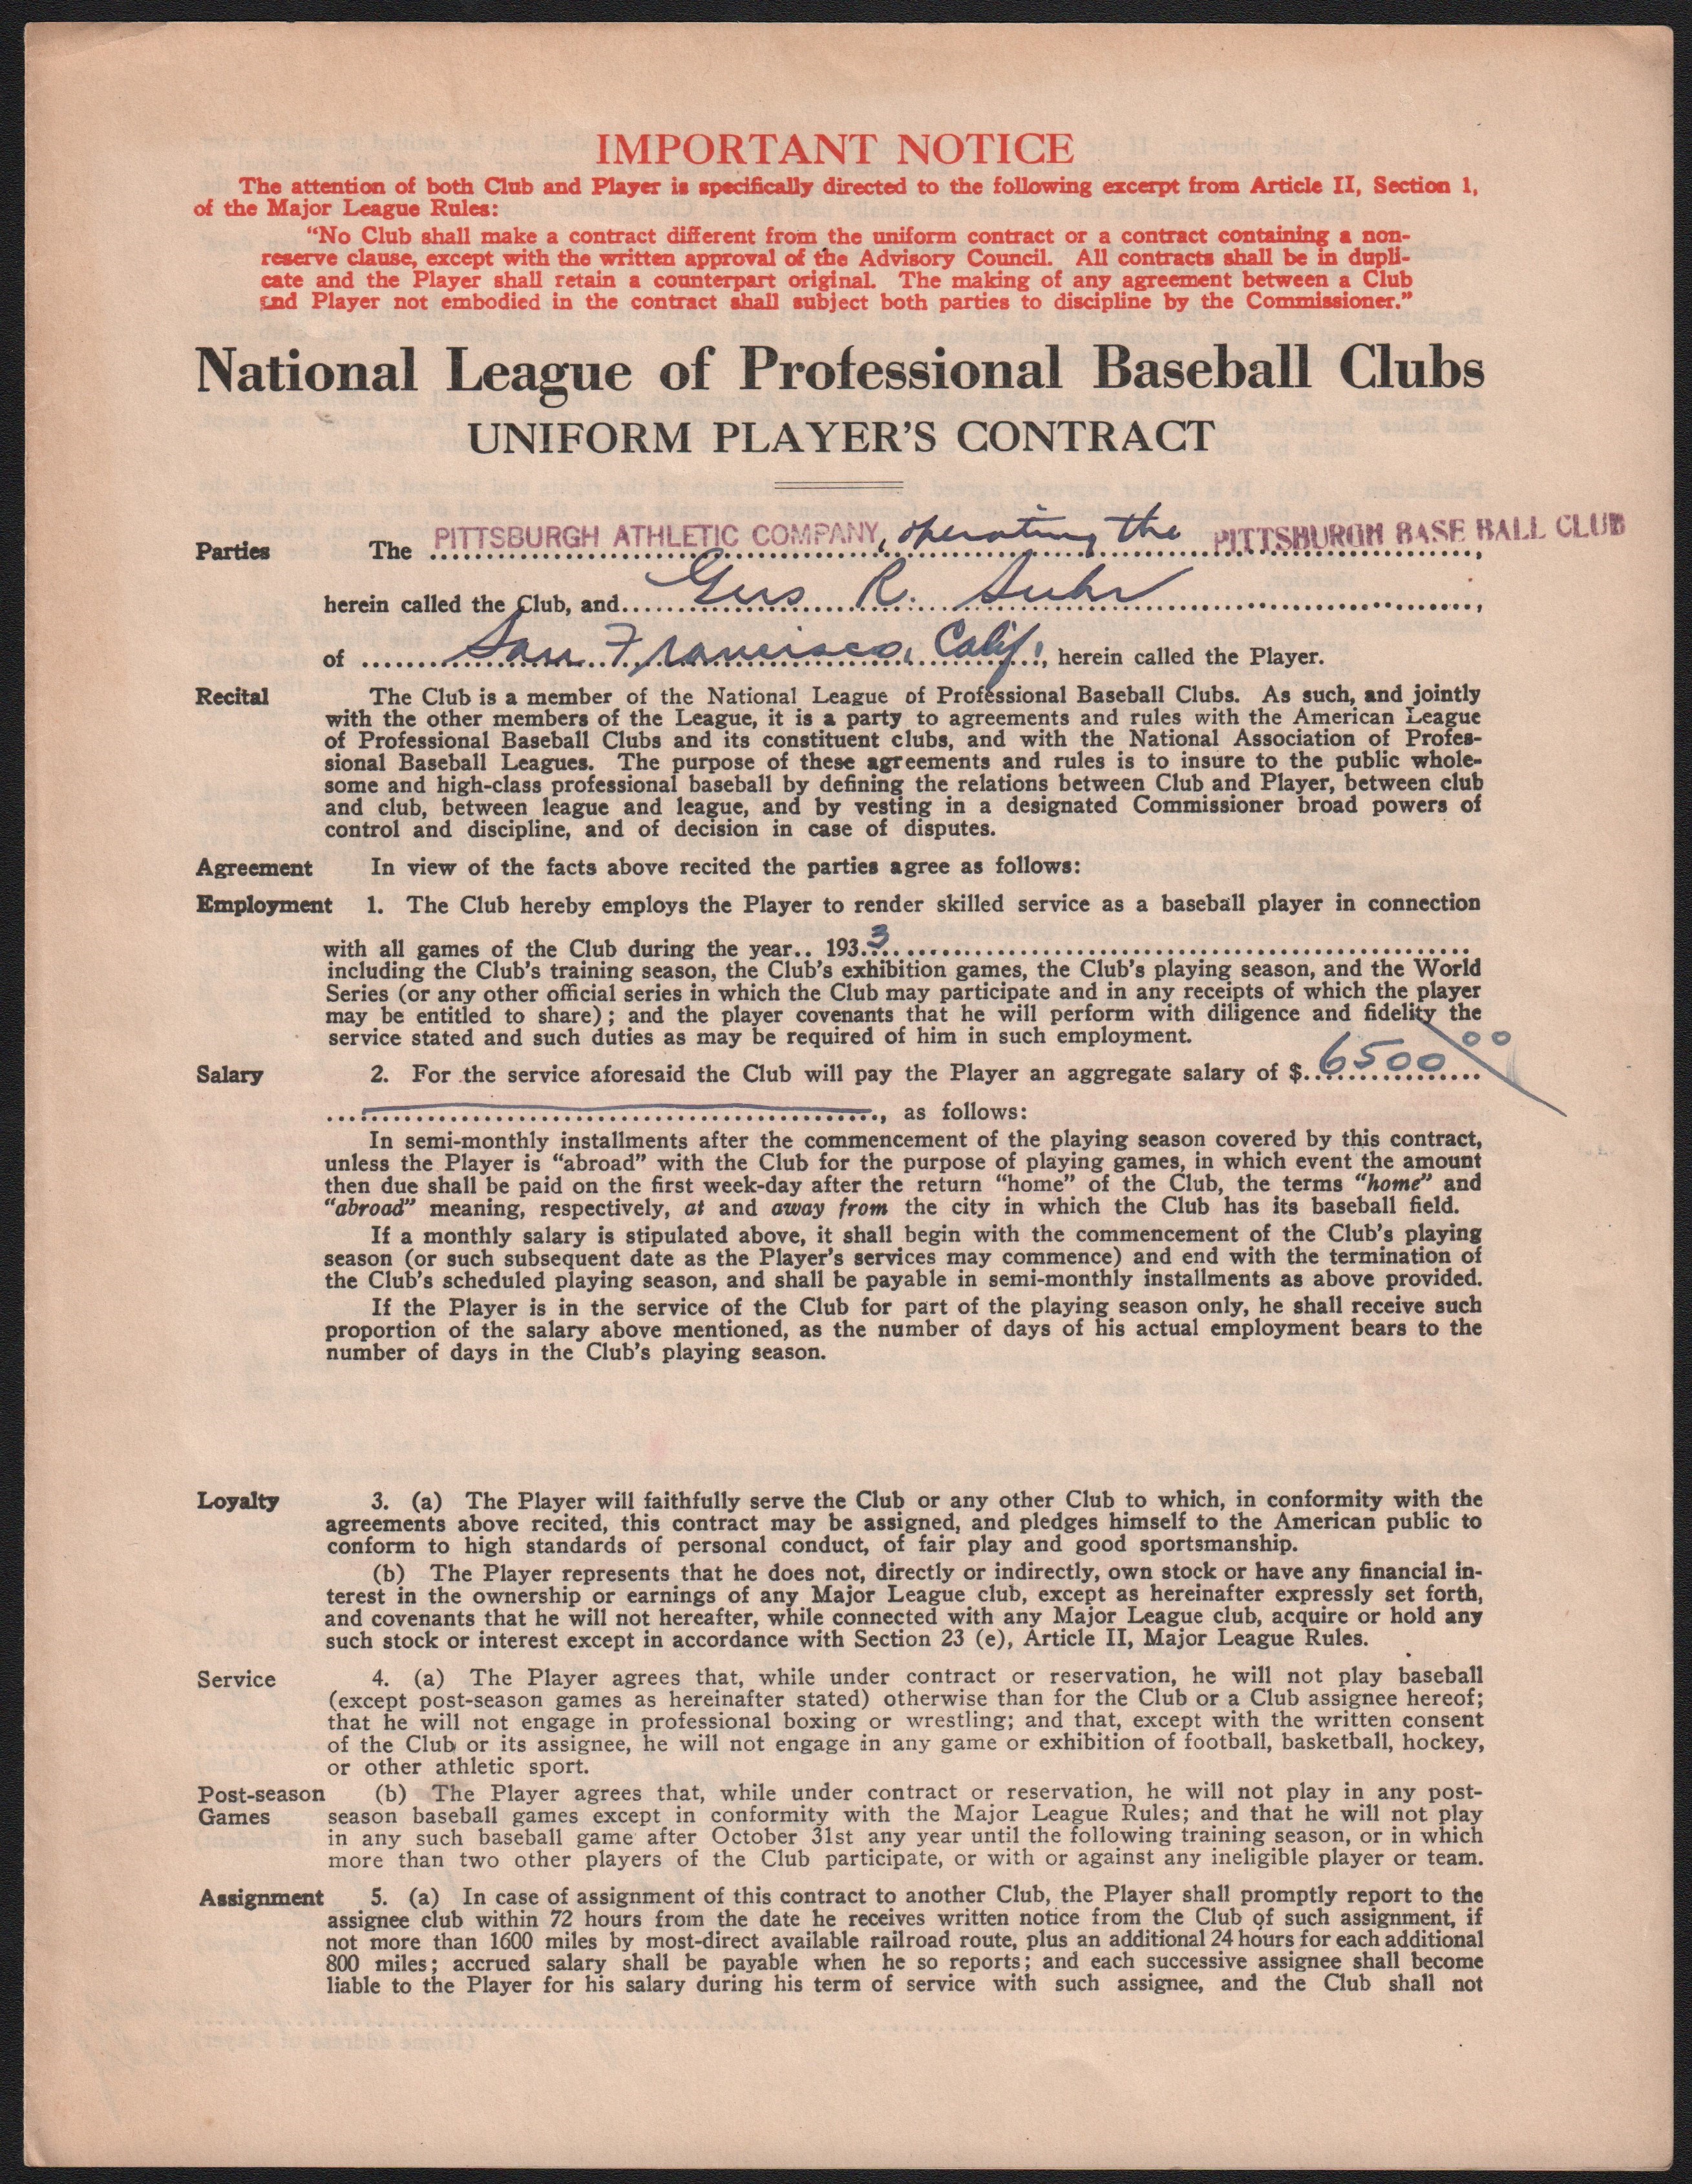 Baseball Autographs - 1933 Gus Suhr Pittsburgh Pirates Contract with John Heydler - N.L. Iron Man